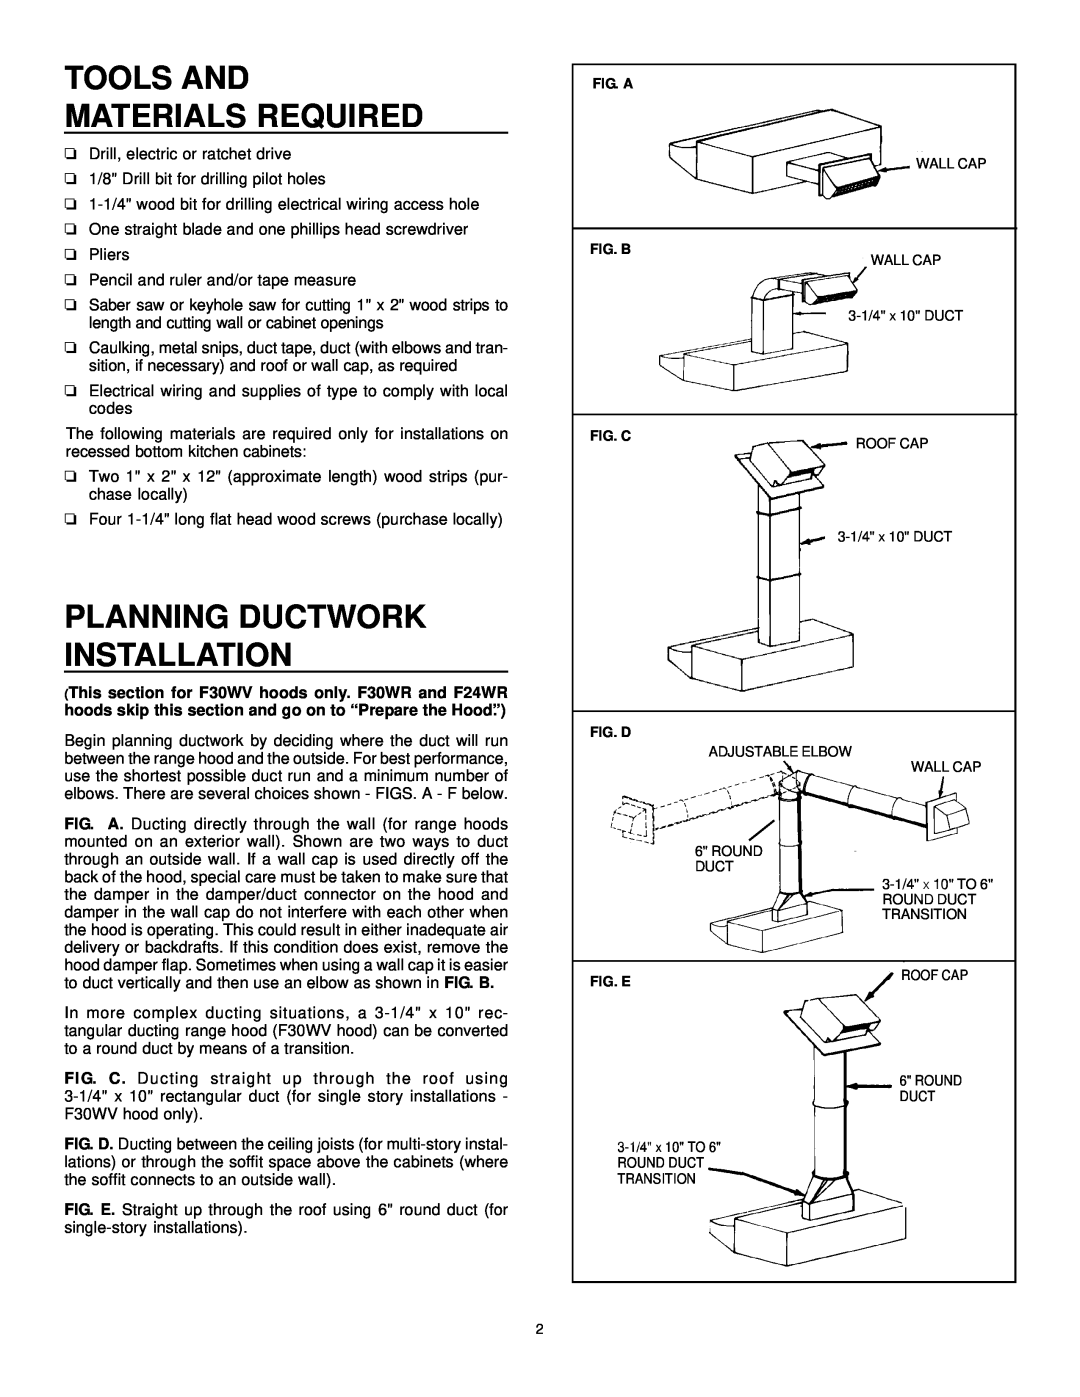 Frigidaire F30WR, F24WR, F30WV installation instructions Tools And Materials Required, Planning Ductwork Installation 